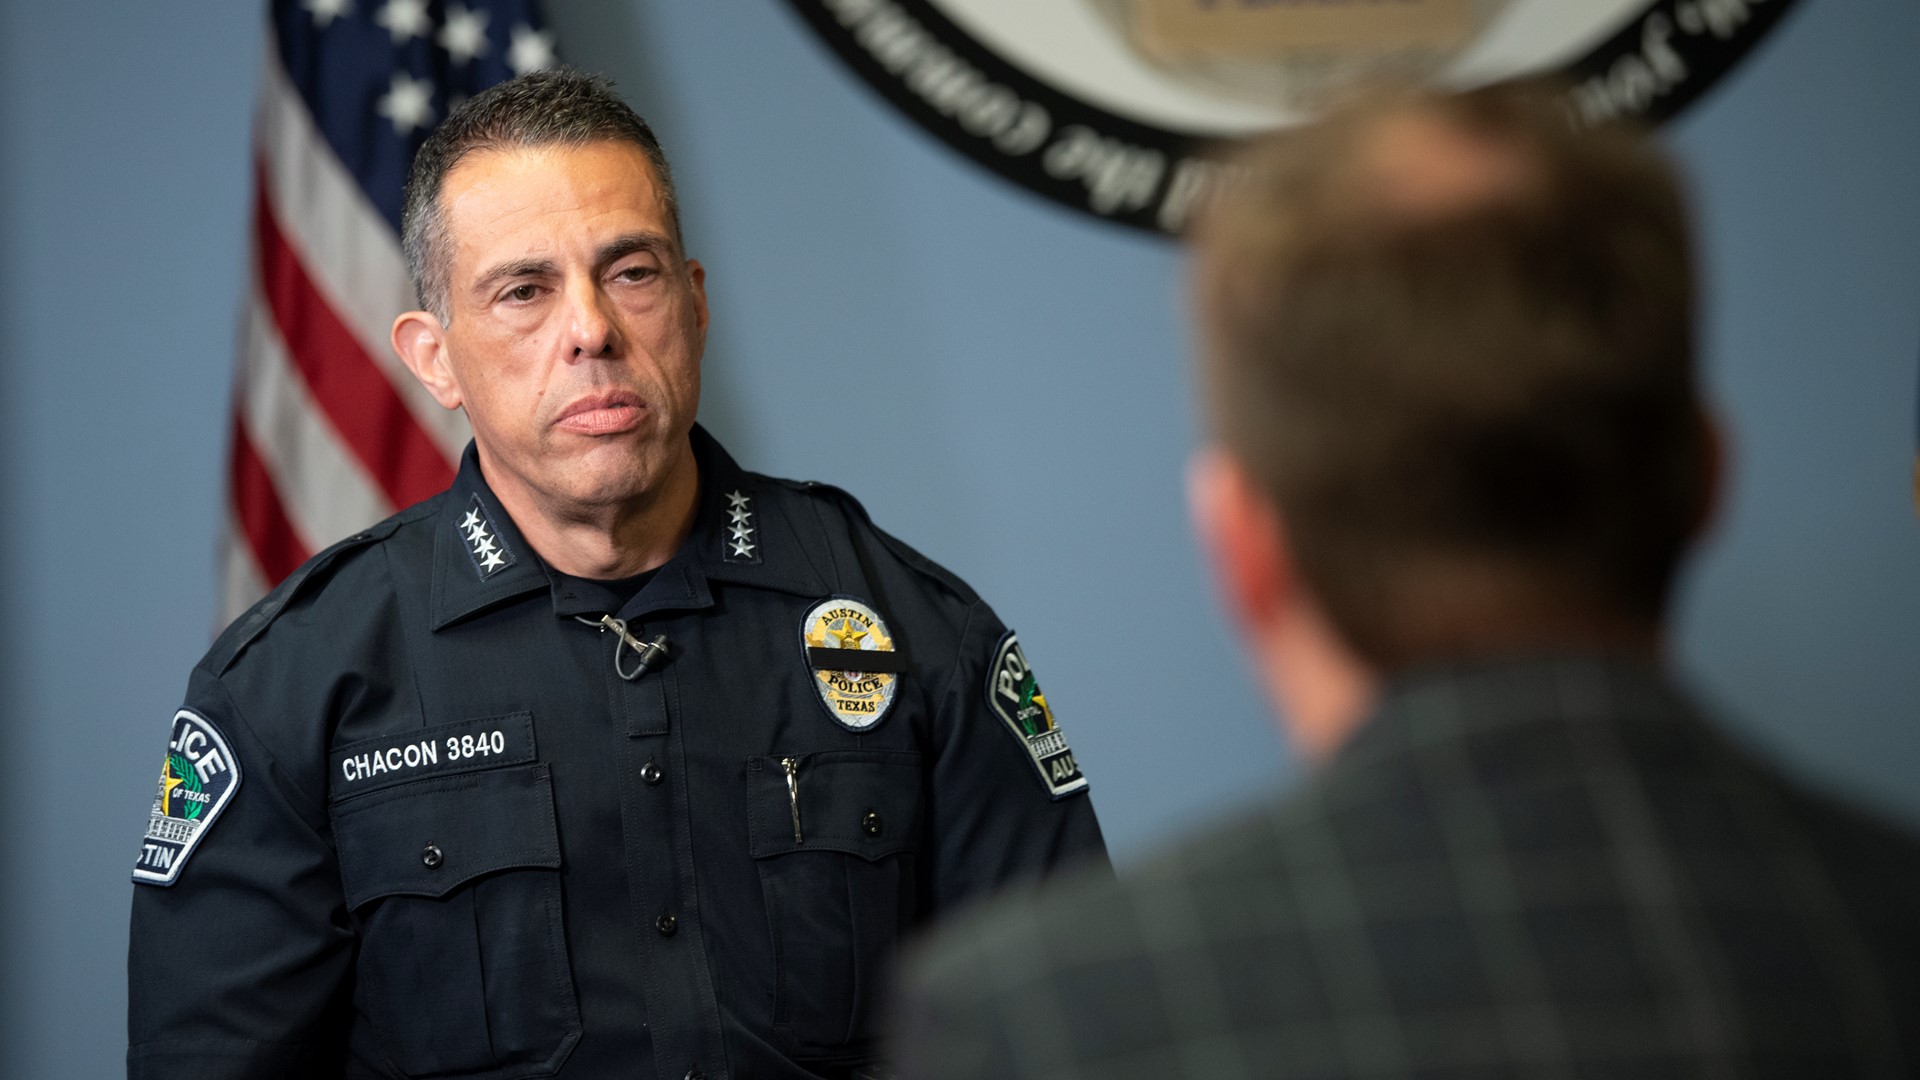 Austin Police Chief Joe Chacon sat down with KVUE Senior Reporter Tony Plohetski to discuss how the department will — and won't — respond to future protests.